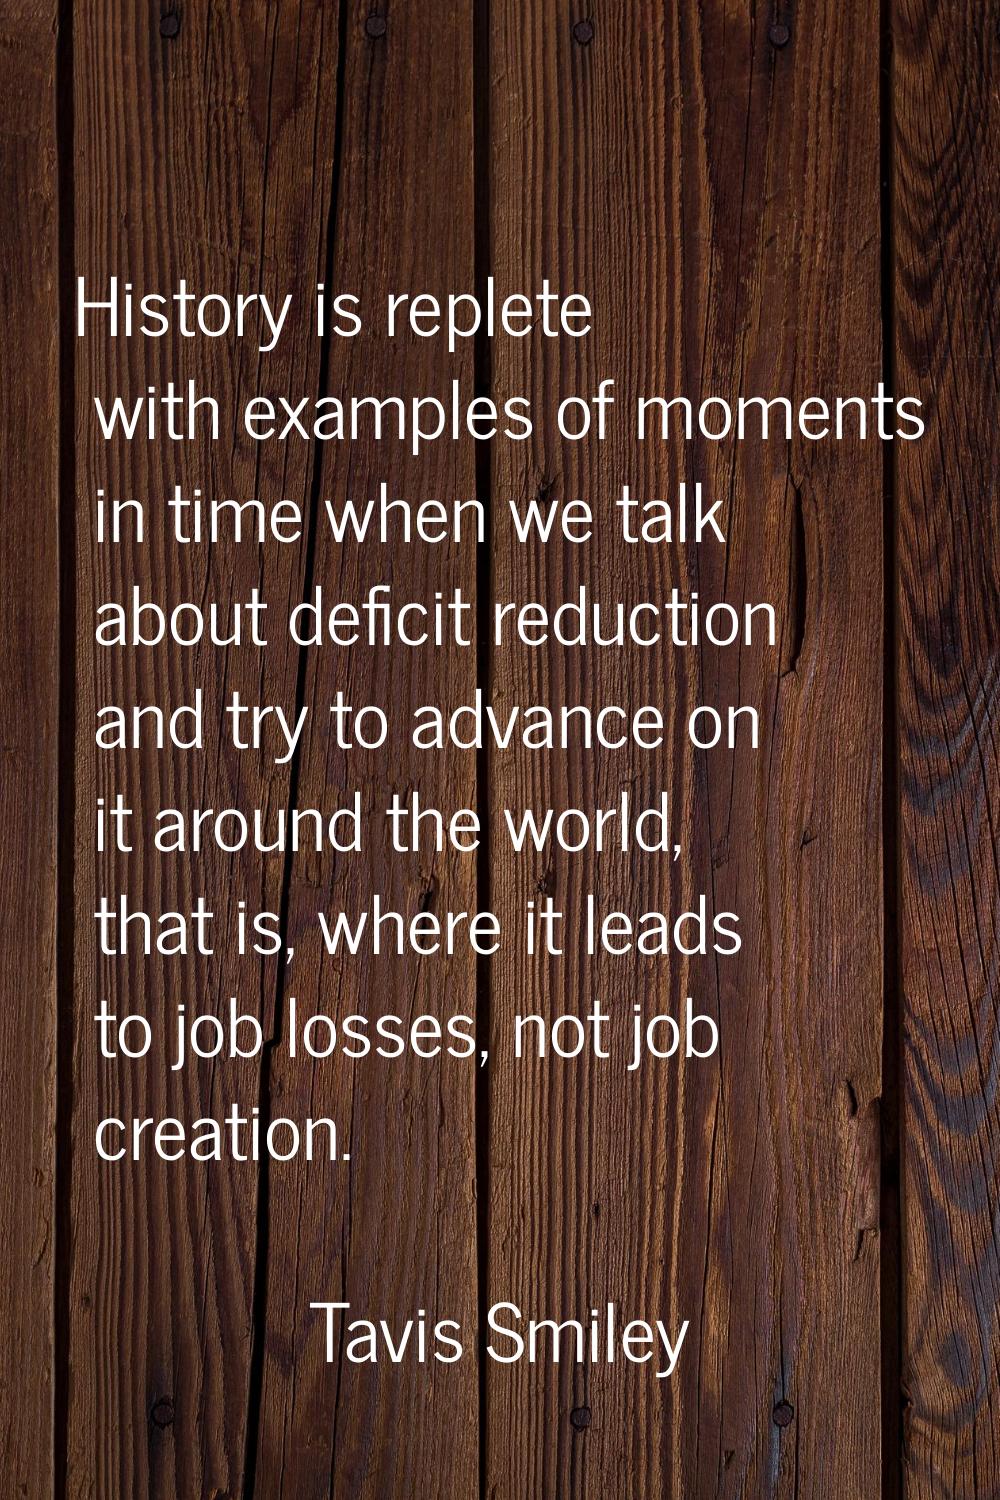 History is replete with examples of moments in time when we talk about deficit reduction and try to